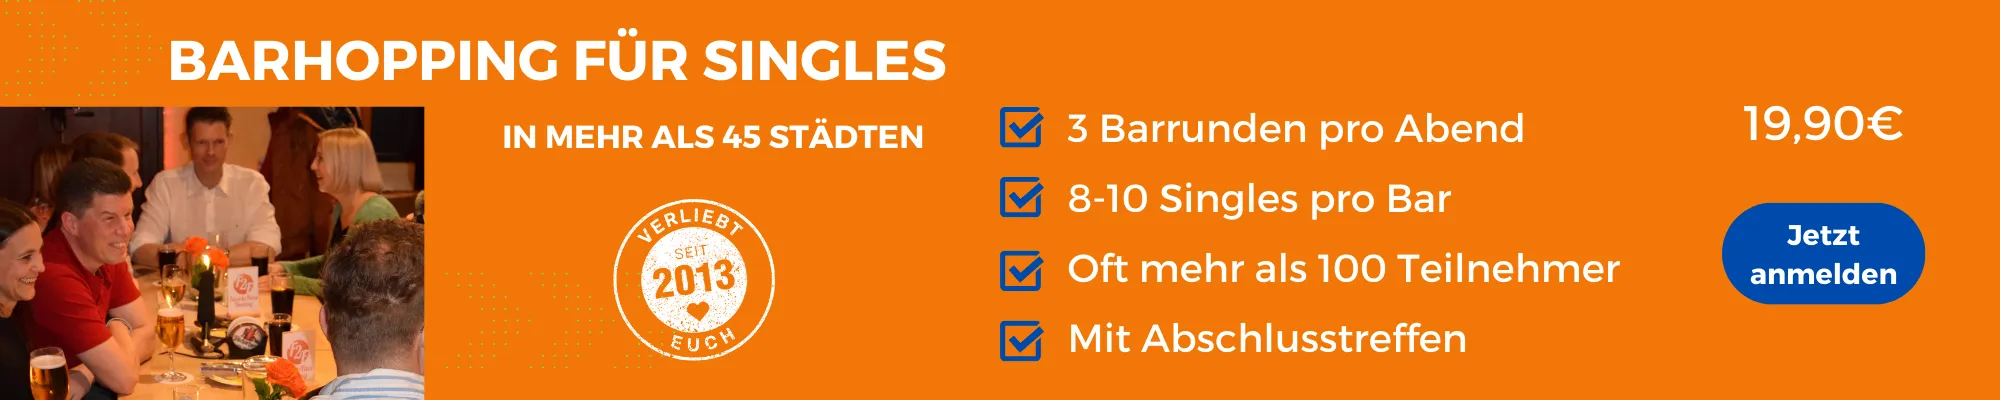 Face-to-Face-Dating: Barhopping für Singles